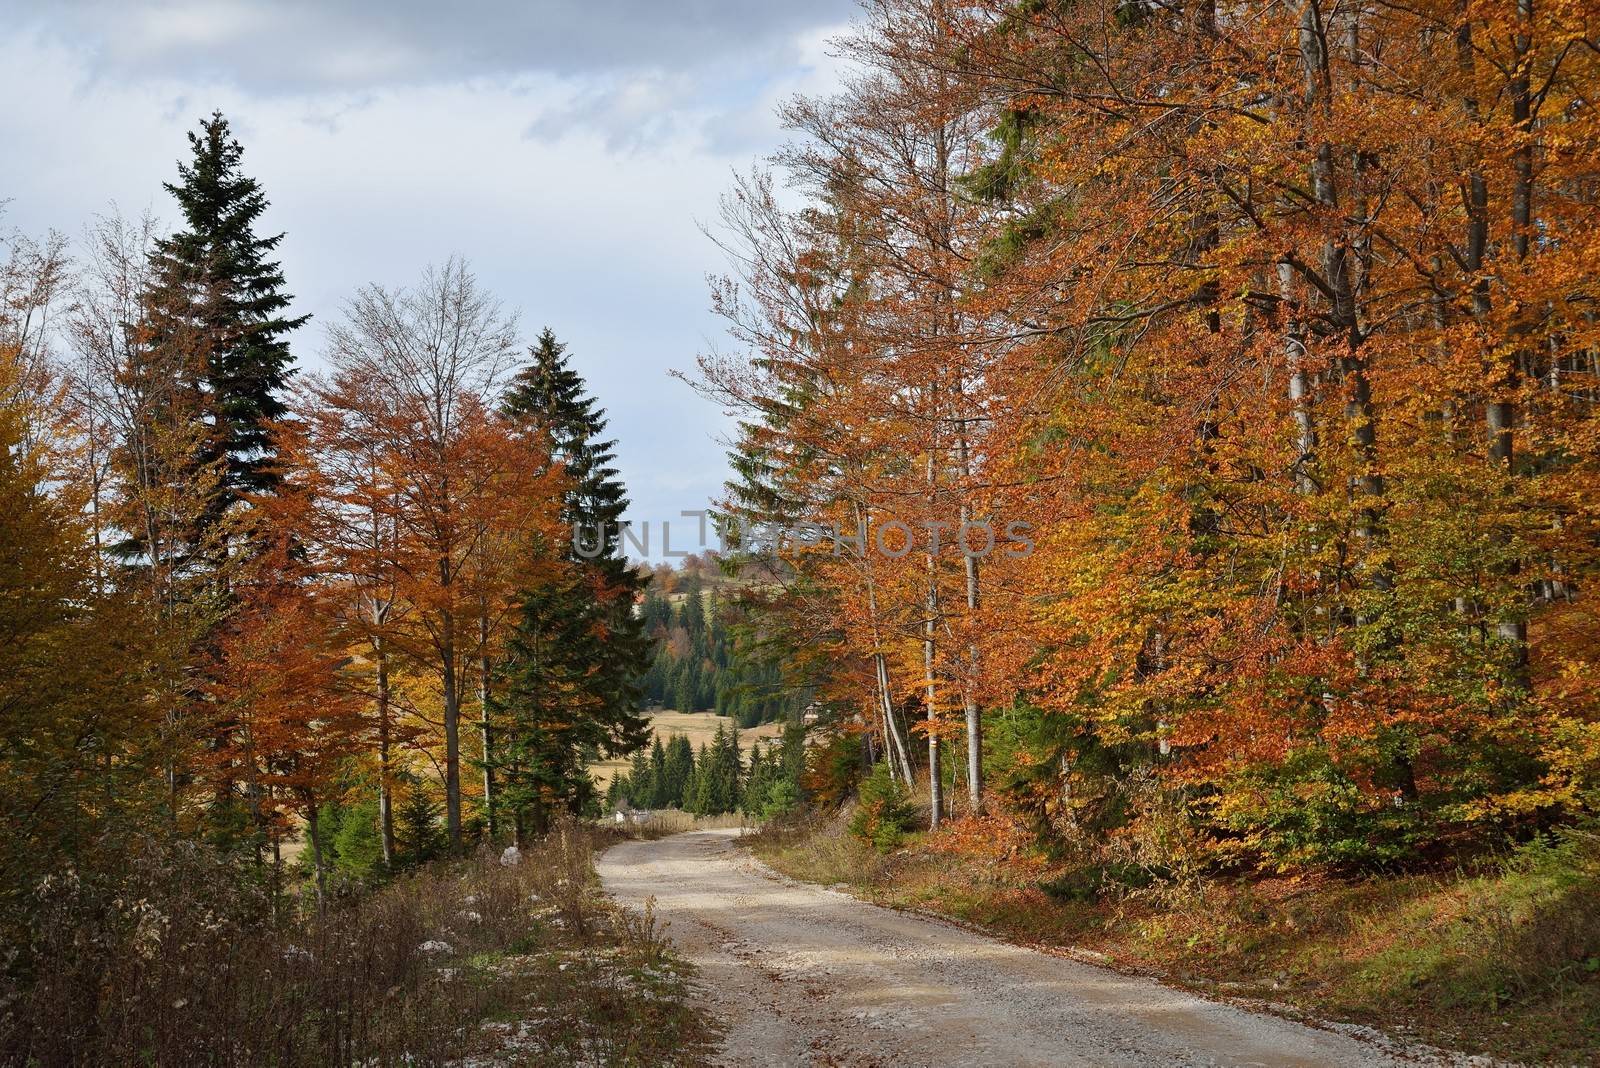 Road in Colorful Forest by zagart36